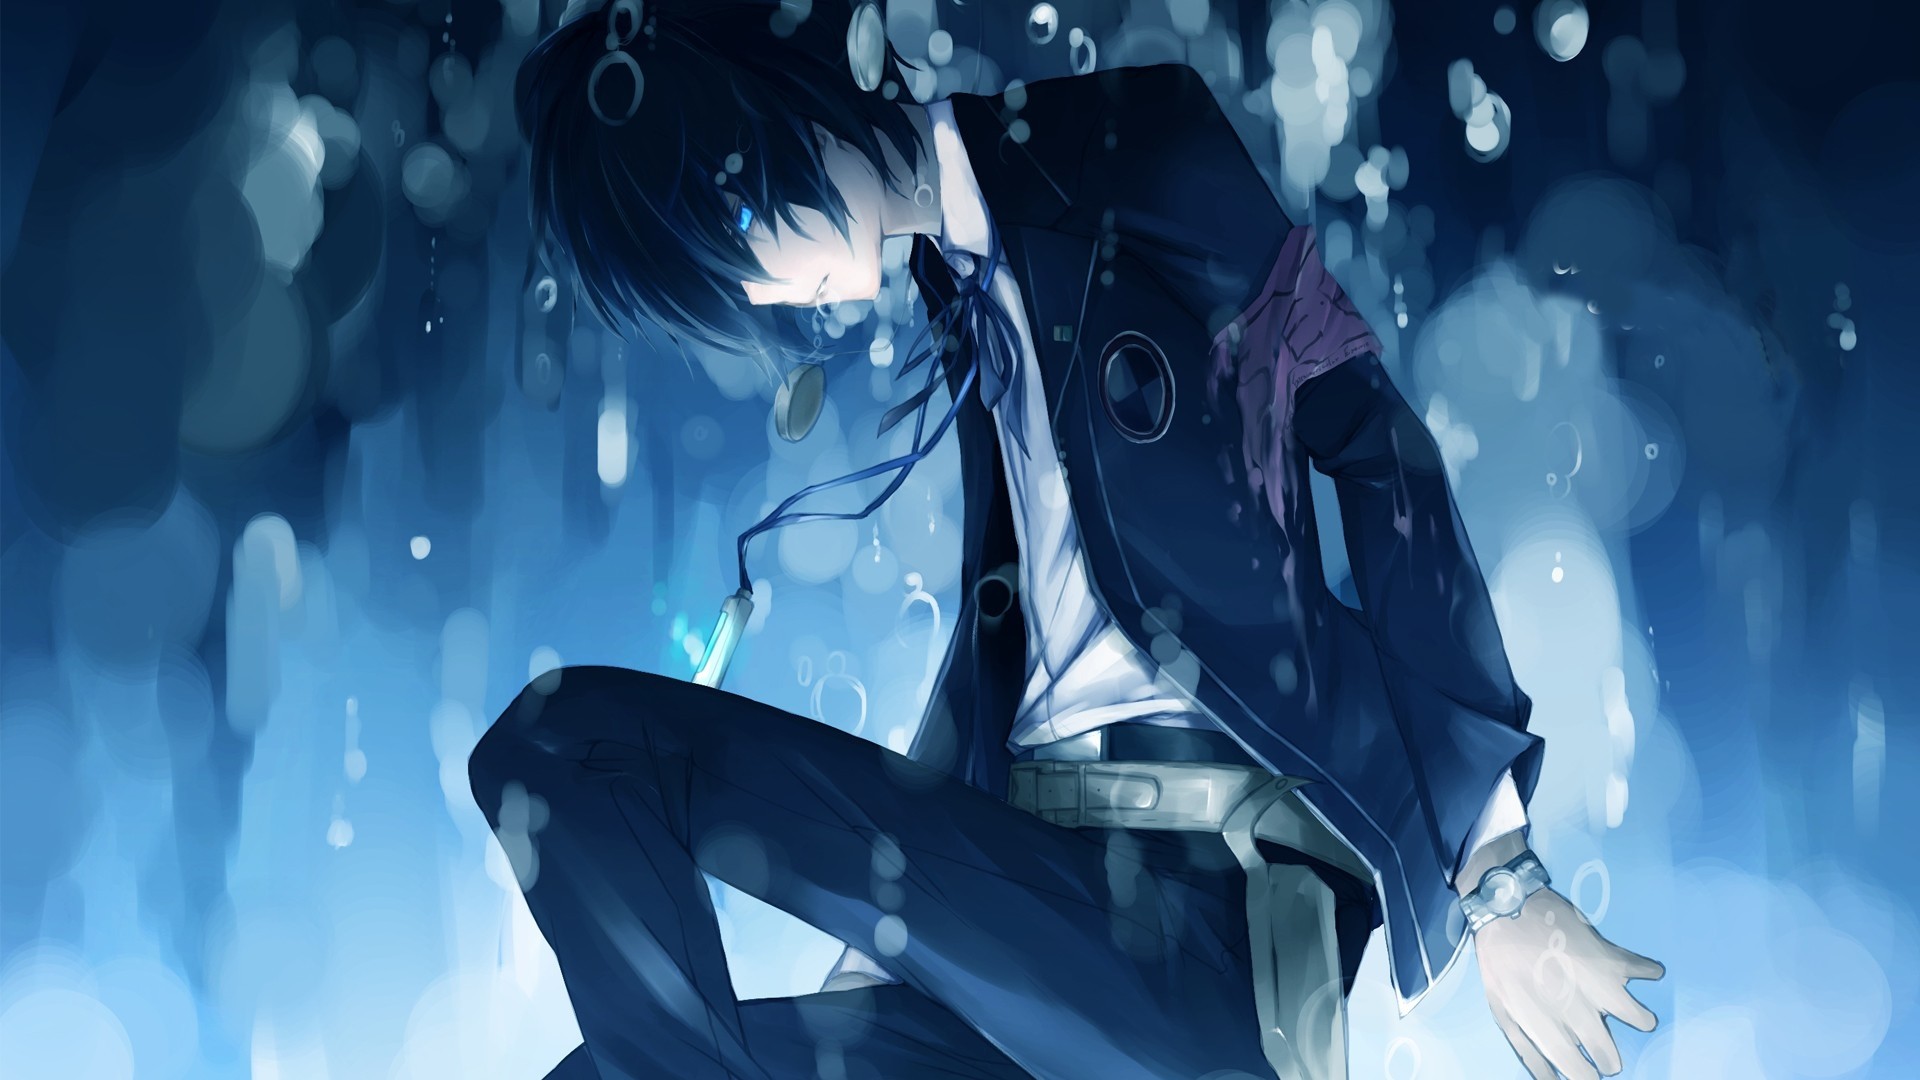 Handsome Anime Boy Wallpapers - Wallpaper Cave